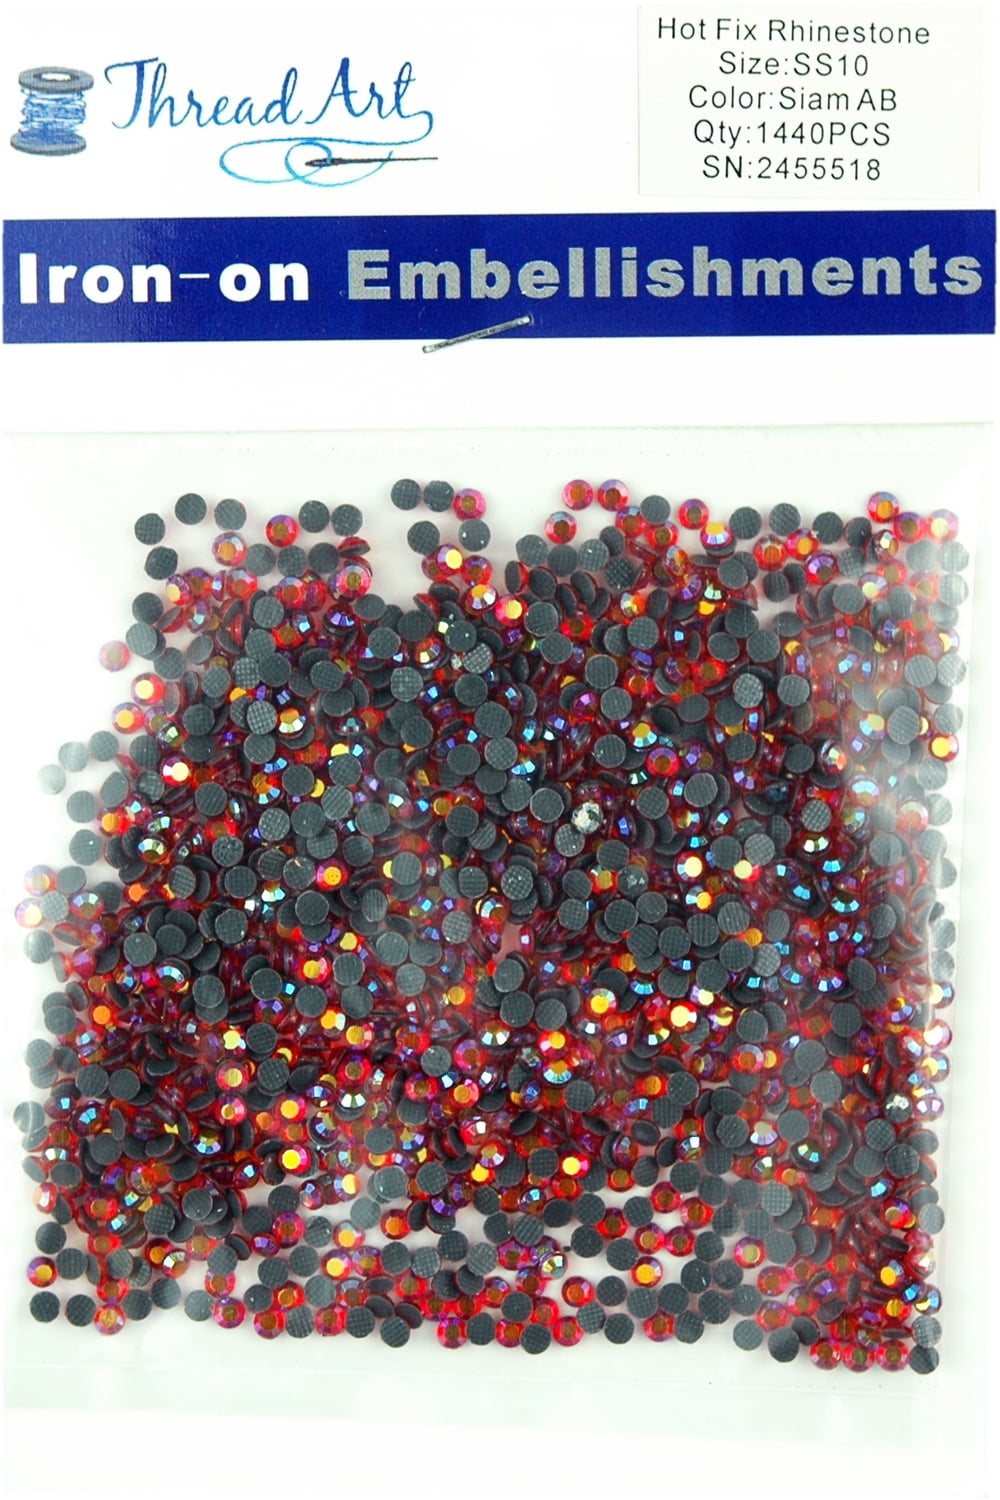 Hot Fix Korean Rhinestones - Size SS06 - By the Ounce